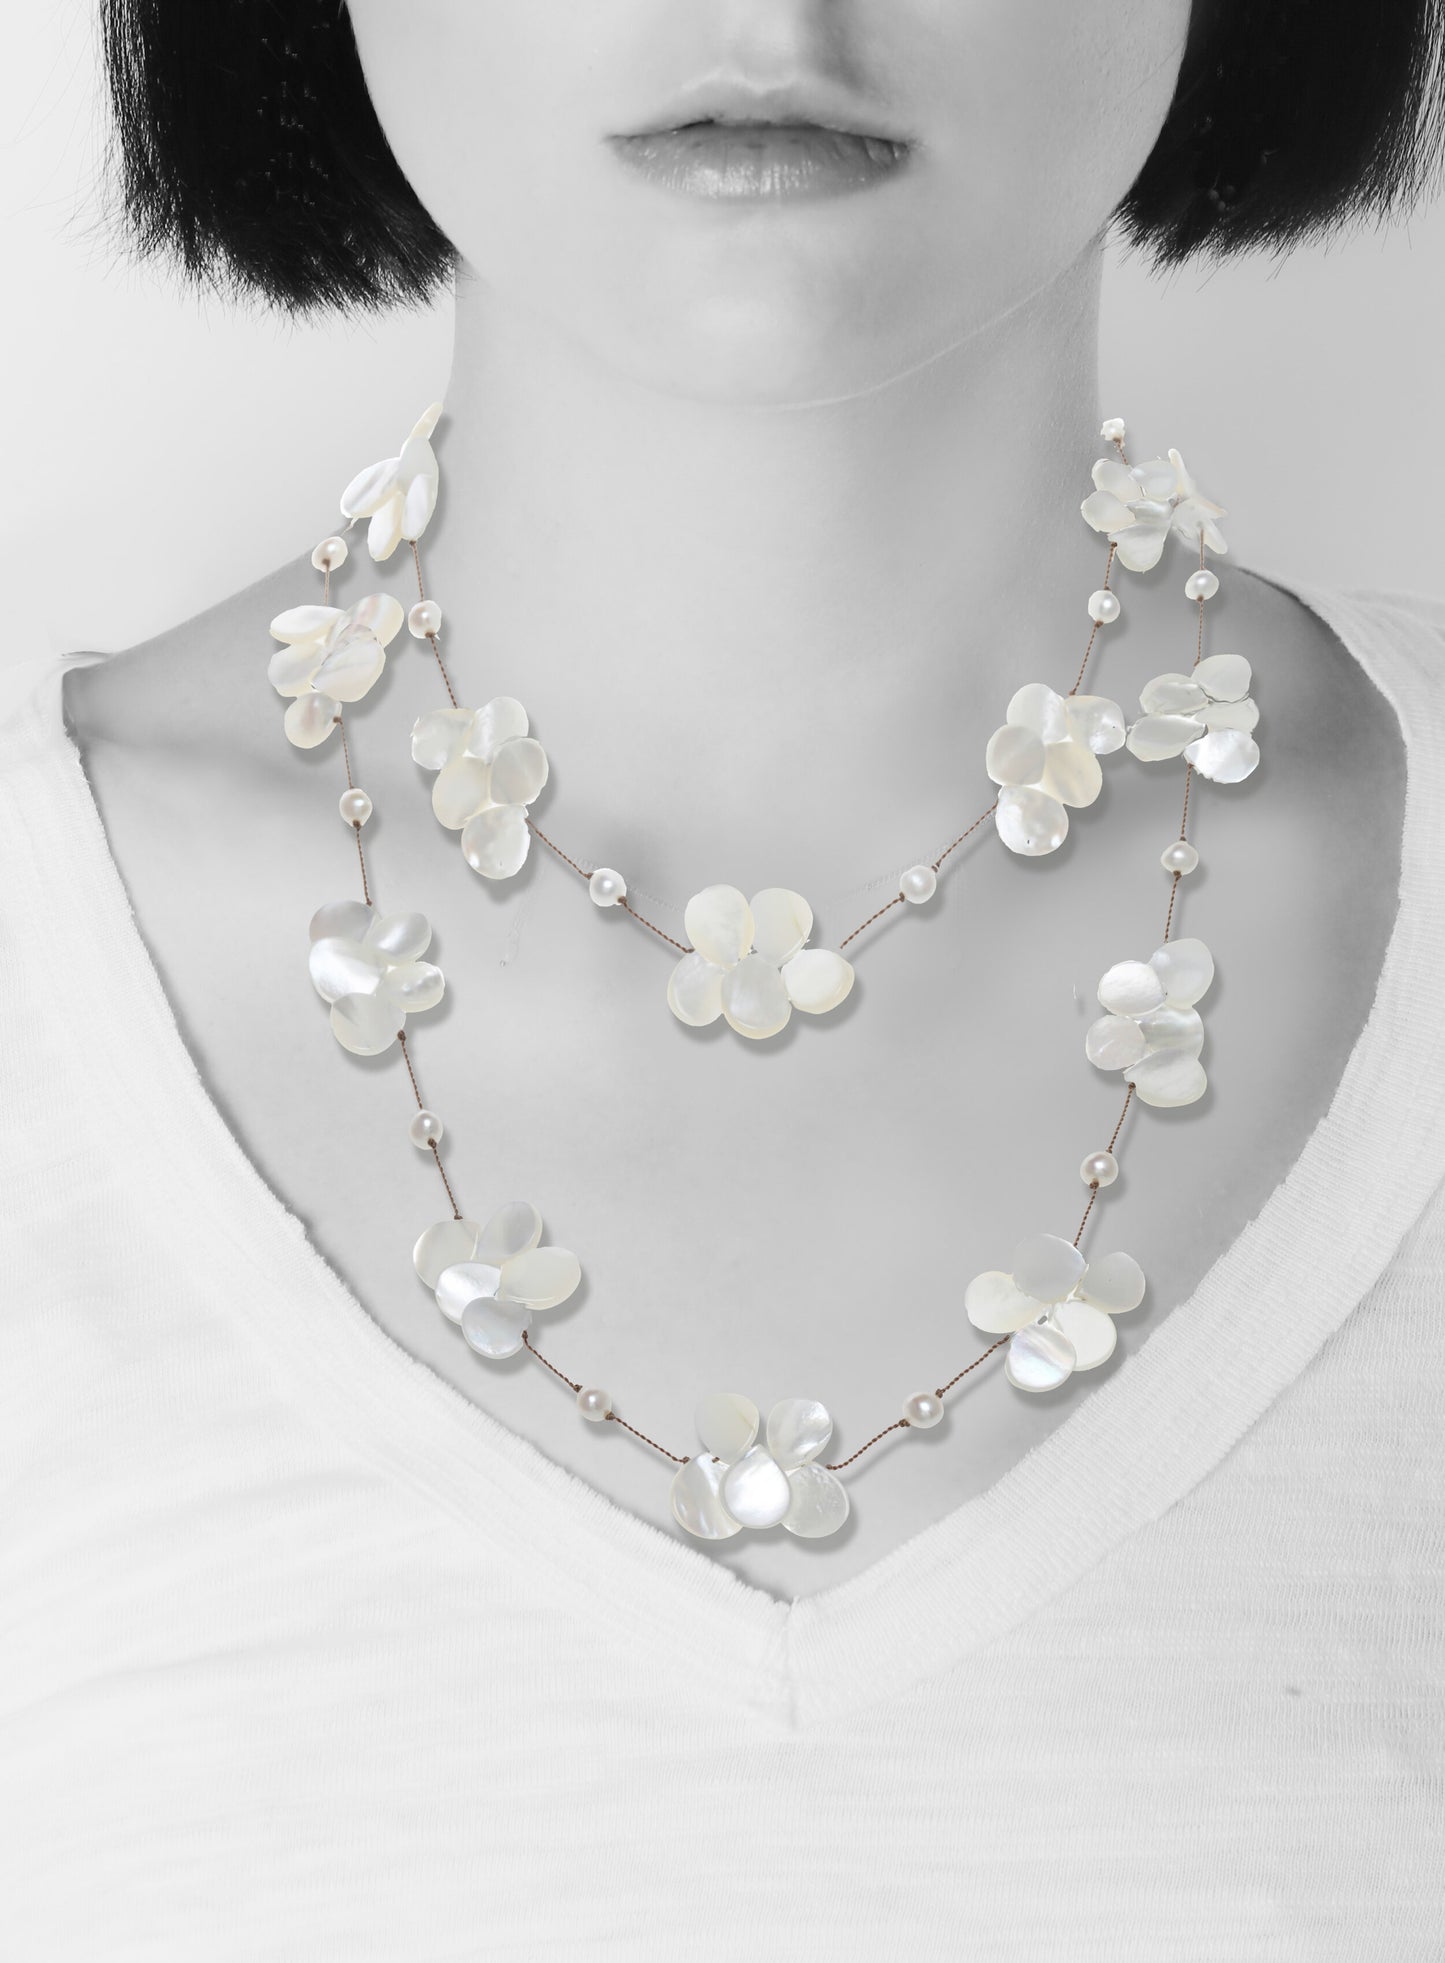 MOTHER OF PEARL FLUTTER NECKLACE, LN-1665